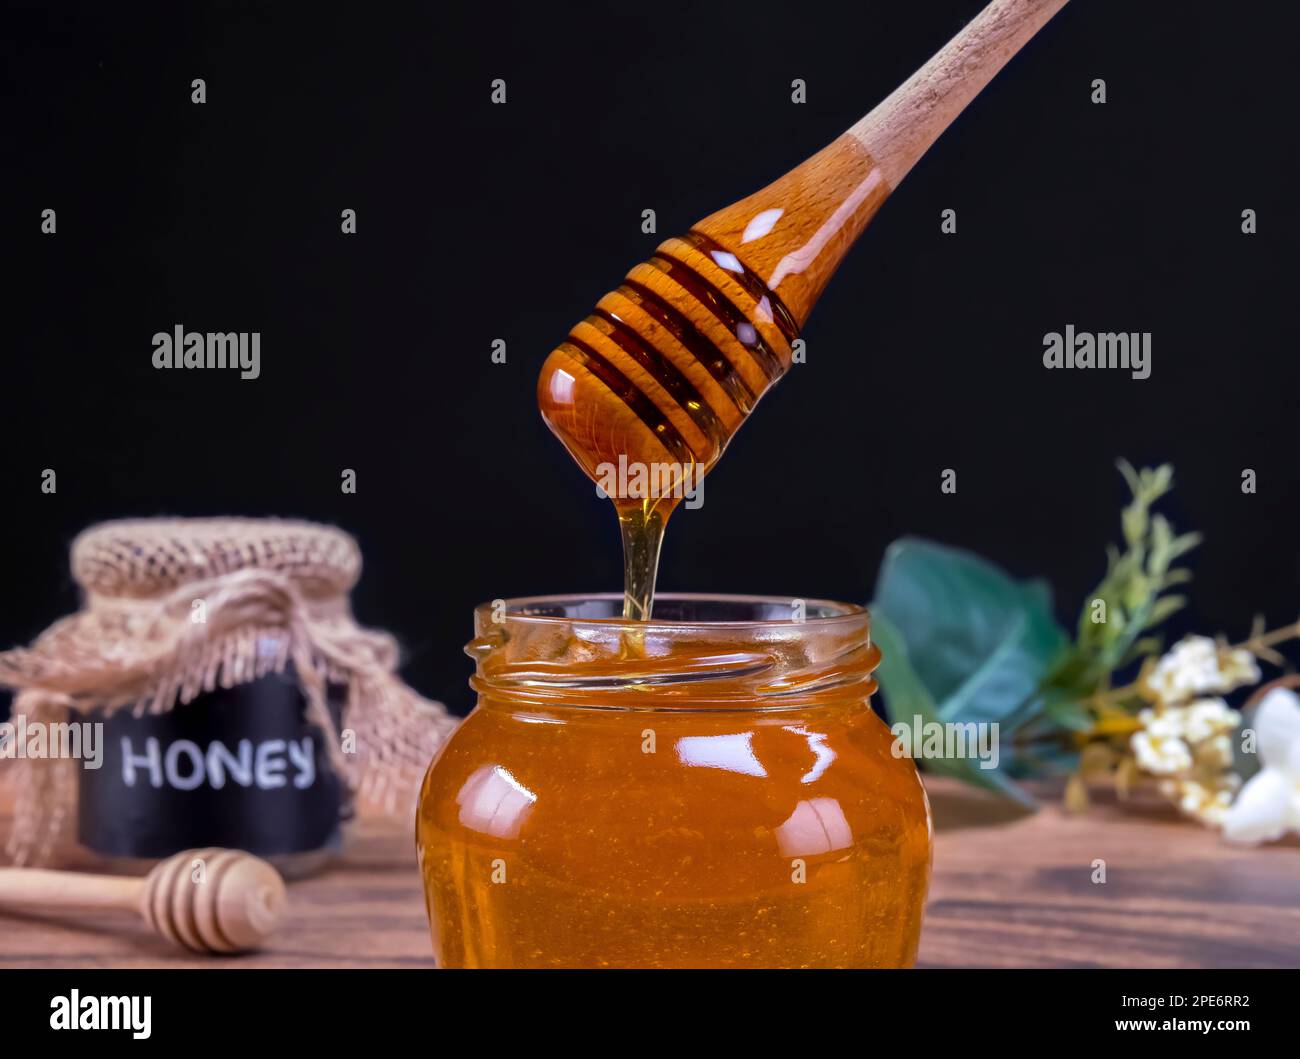 Honey spoon coming out of the jar full of honey in slow motion. Honey contains many nutrients, antioxidants, improves heart health, wound care, offers Stock Photo